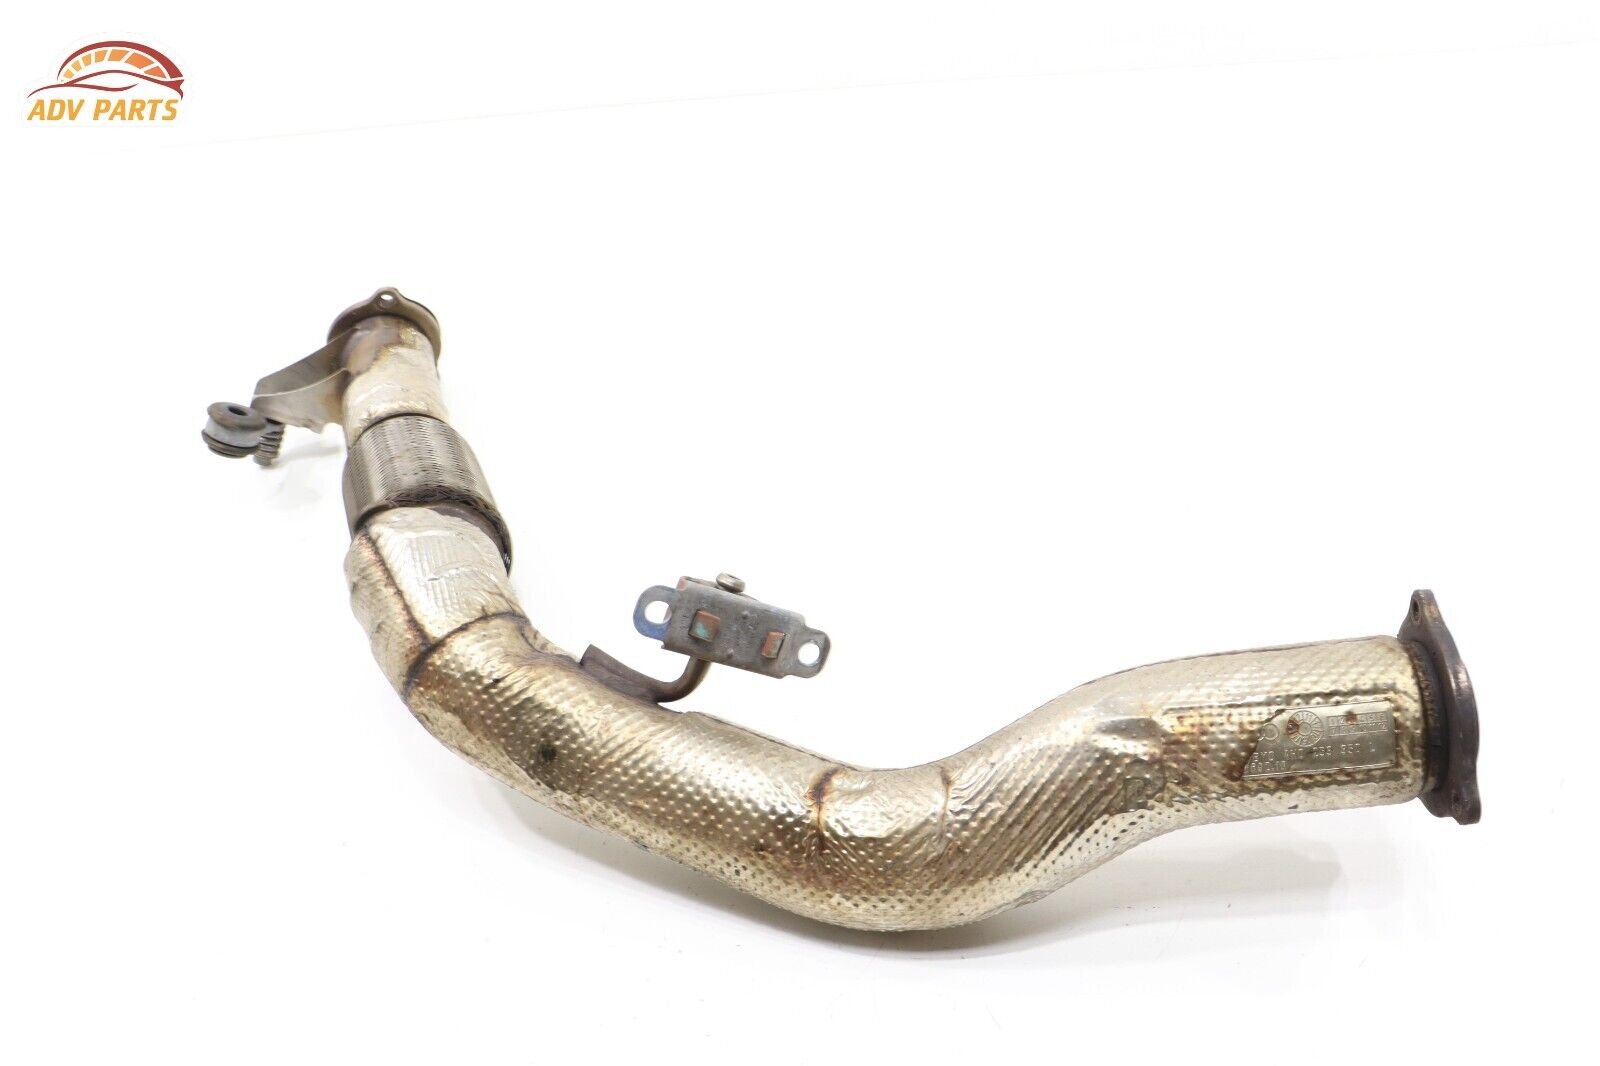 AUDI A8 L 3.0L TDI EXHAUST SYSTEM FRONT DOWN PIPE OEM 2014 - 2016 ??